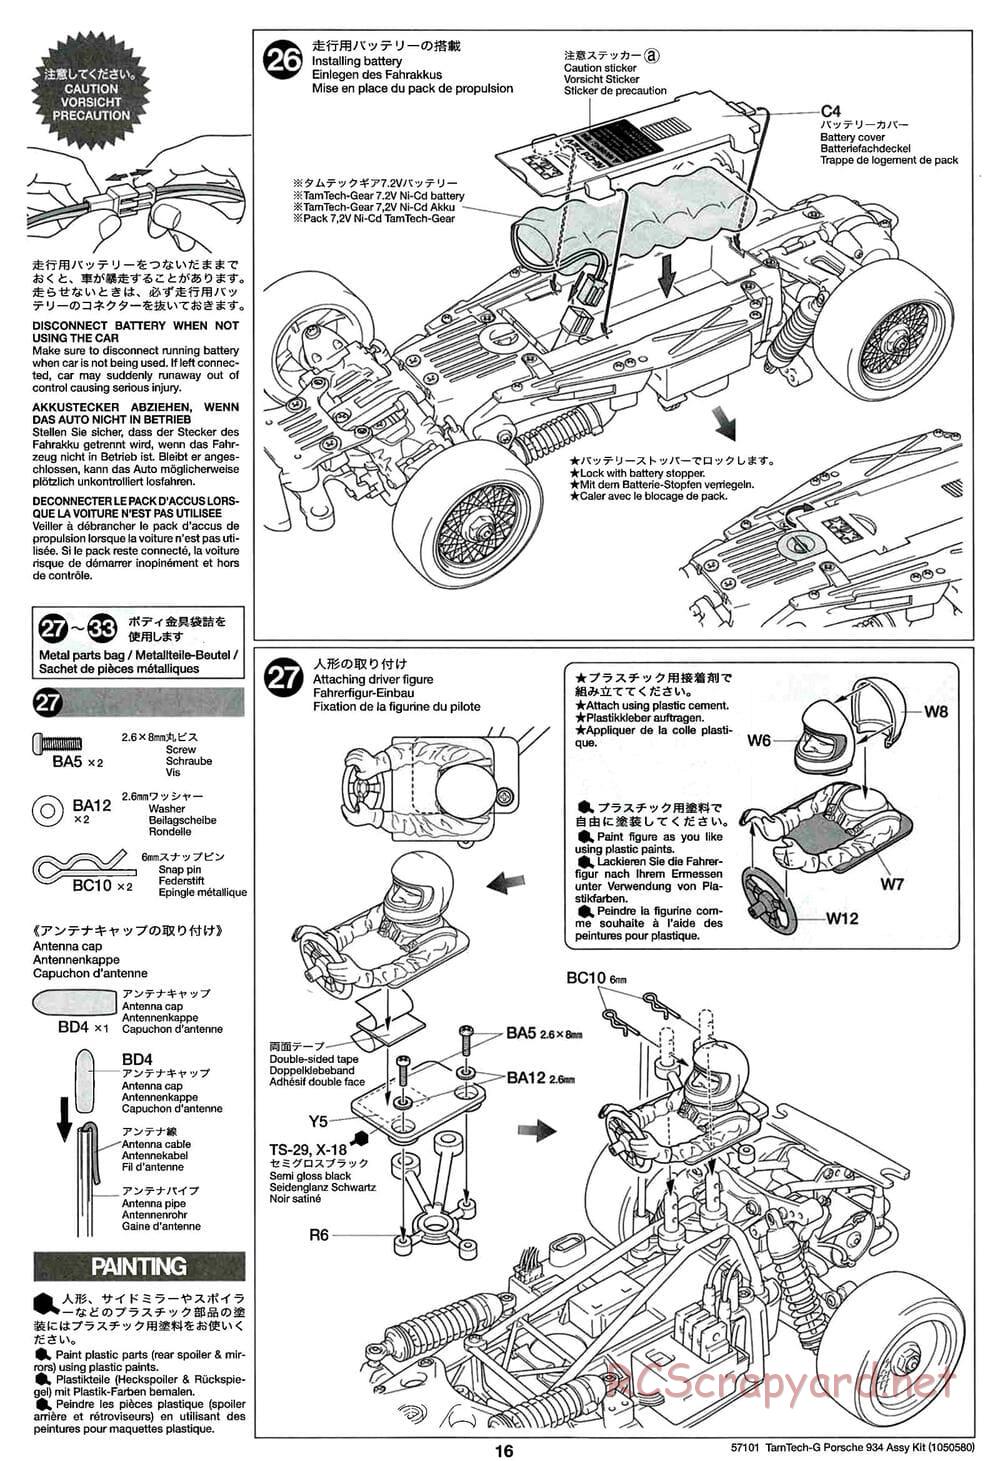 Tamiya - Porsche Turbo RSR - GT-01 Chassis - Manual - Page 16